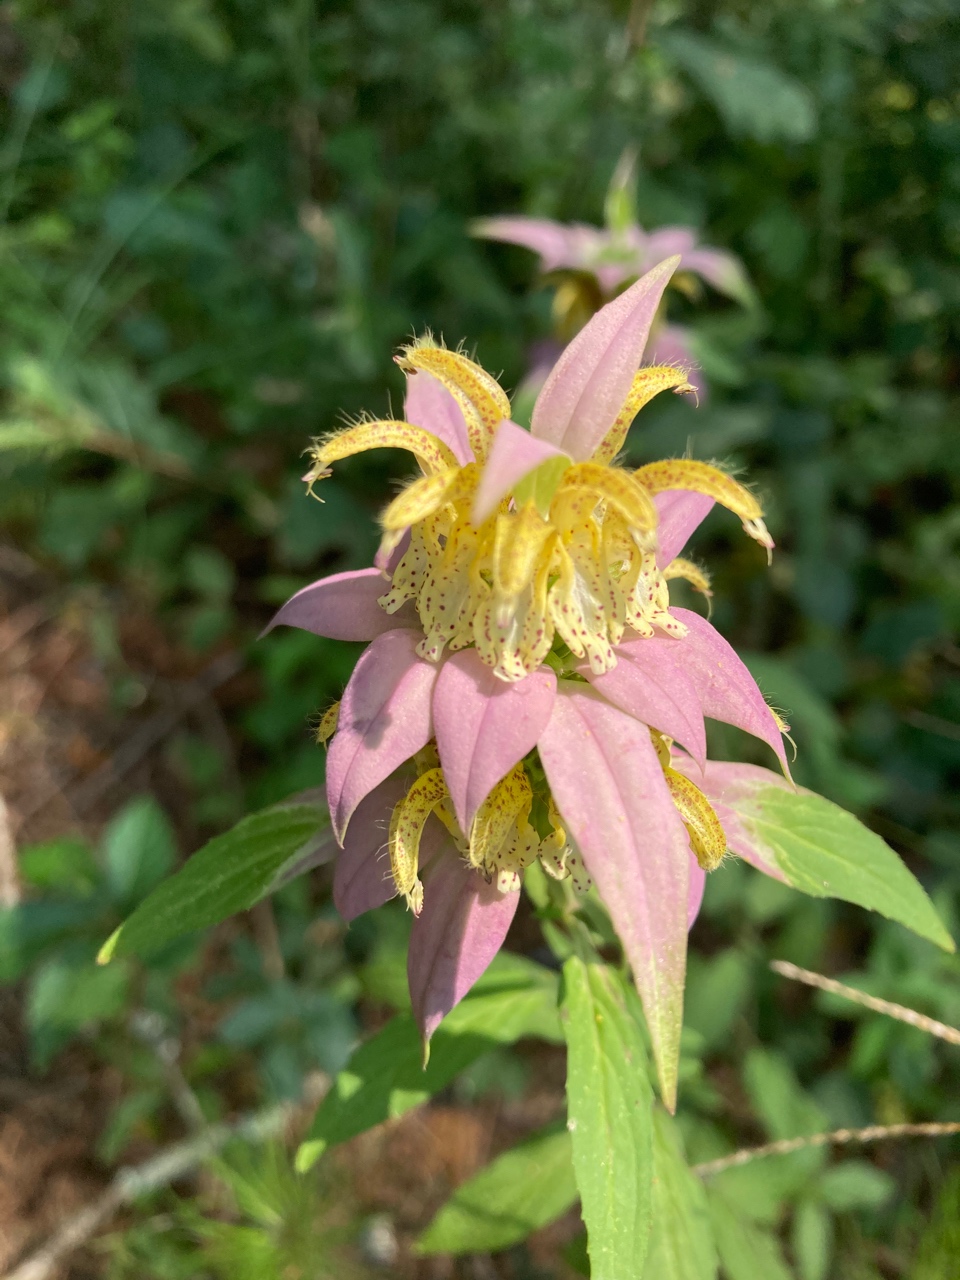 The Scientific Name is Monarda punctata var. punctata. You will likely hear them called Eastern Horse-mint, Spotted Horsemint, Spotted Beebalm, . This picture shows the Close-up of inflorescence showing the 2-3 whorls of flowers. The yellow flowers have purple spots. of Monarda punctata var. punctata